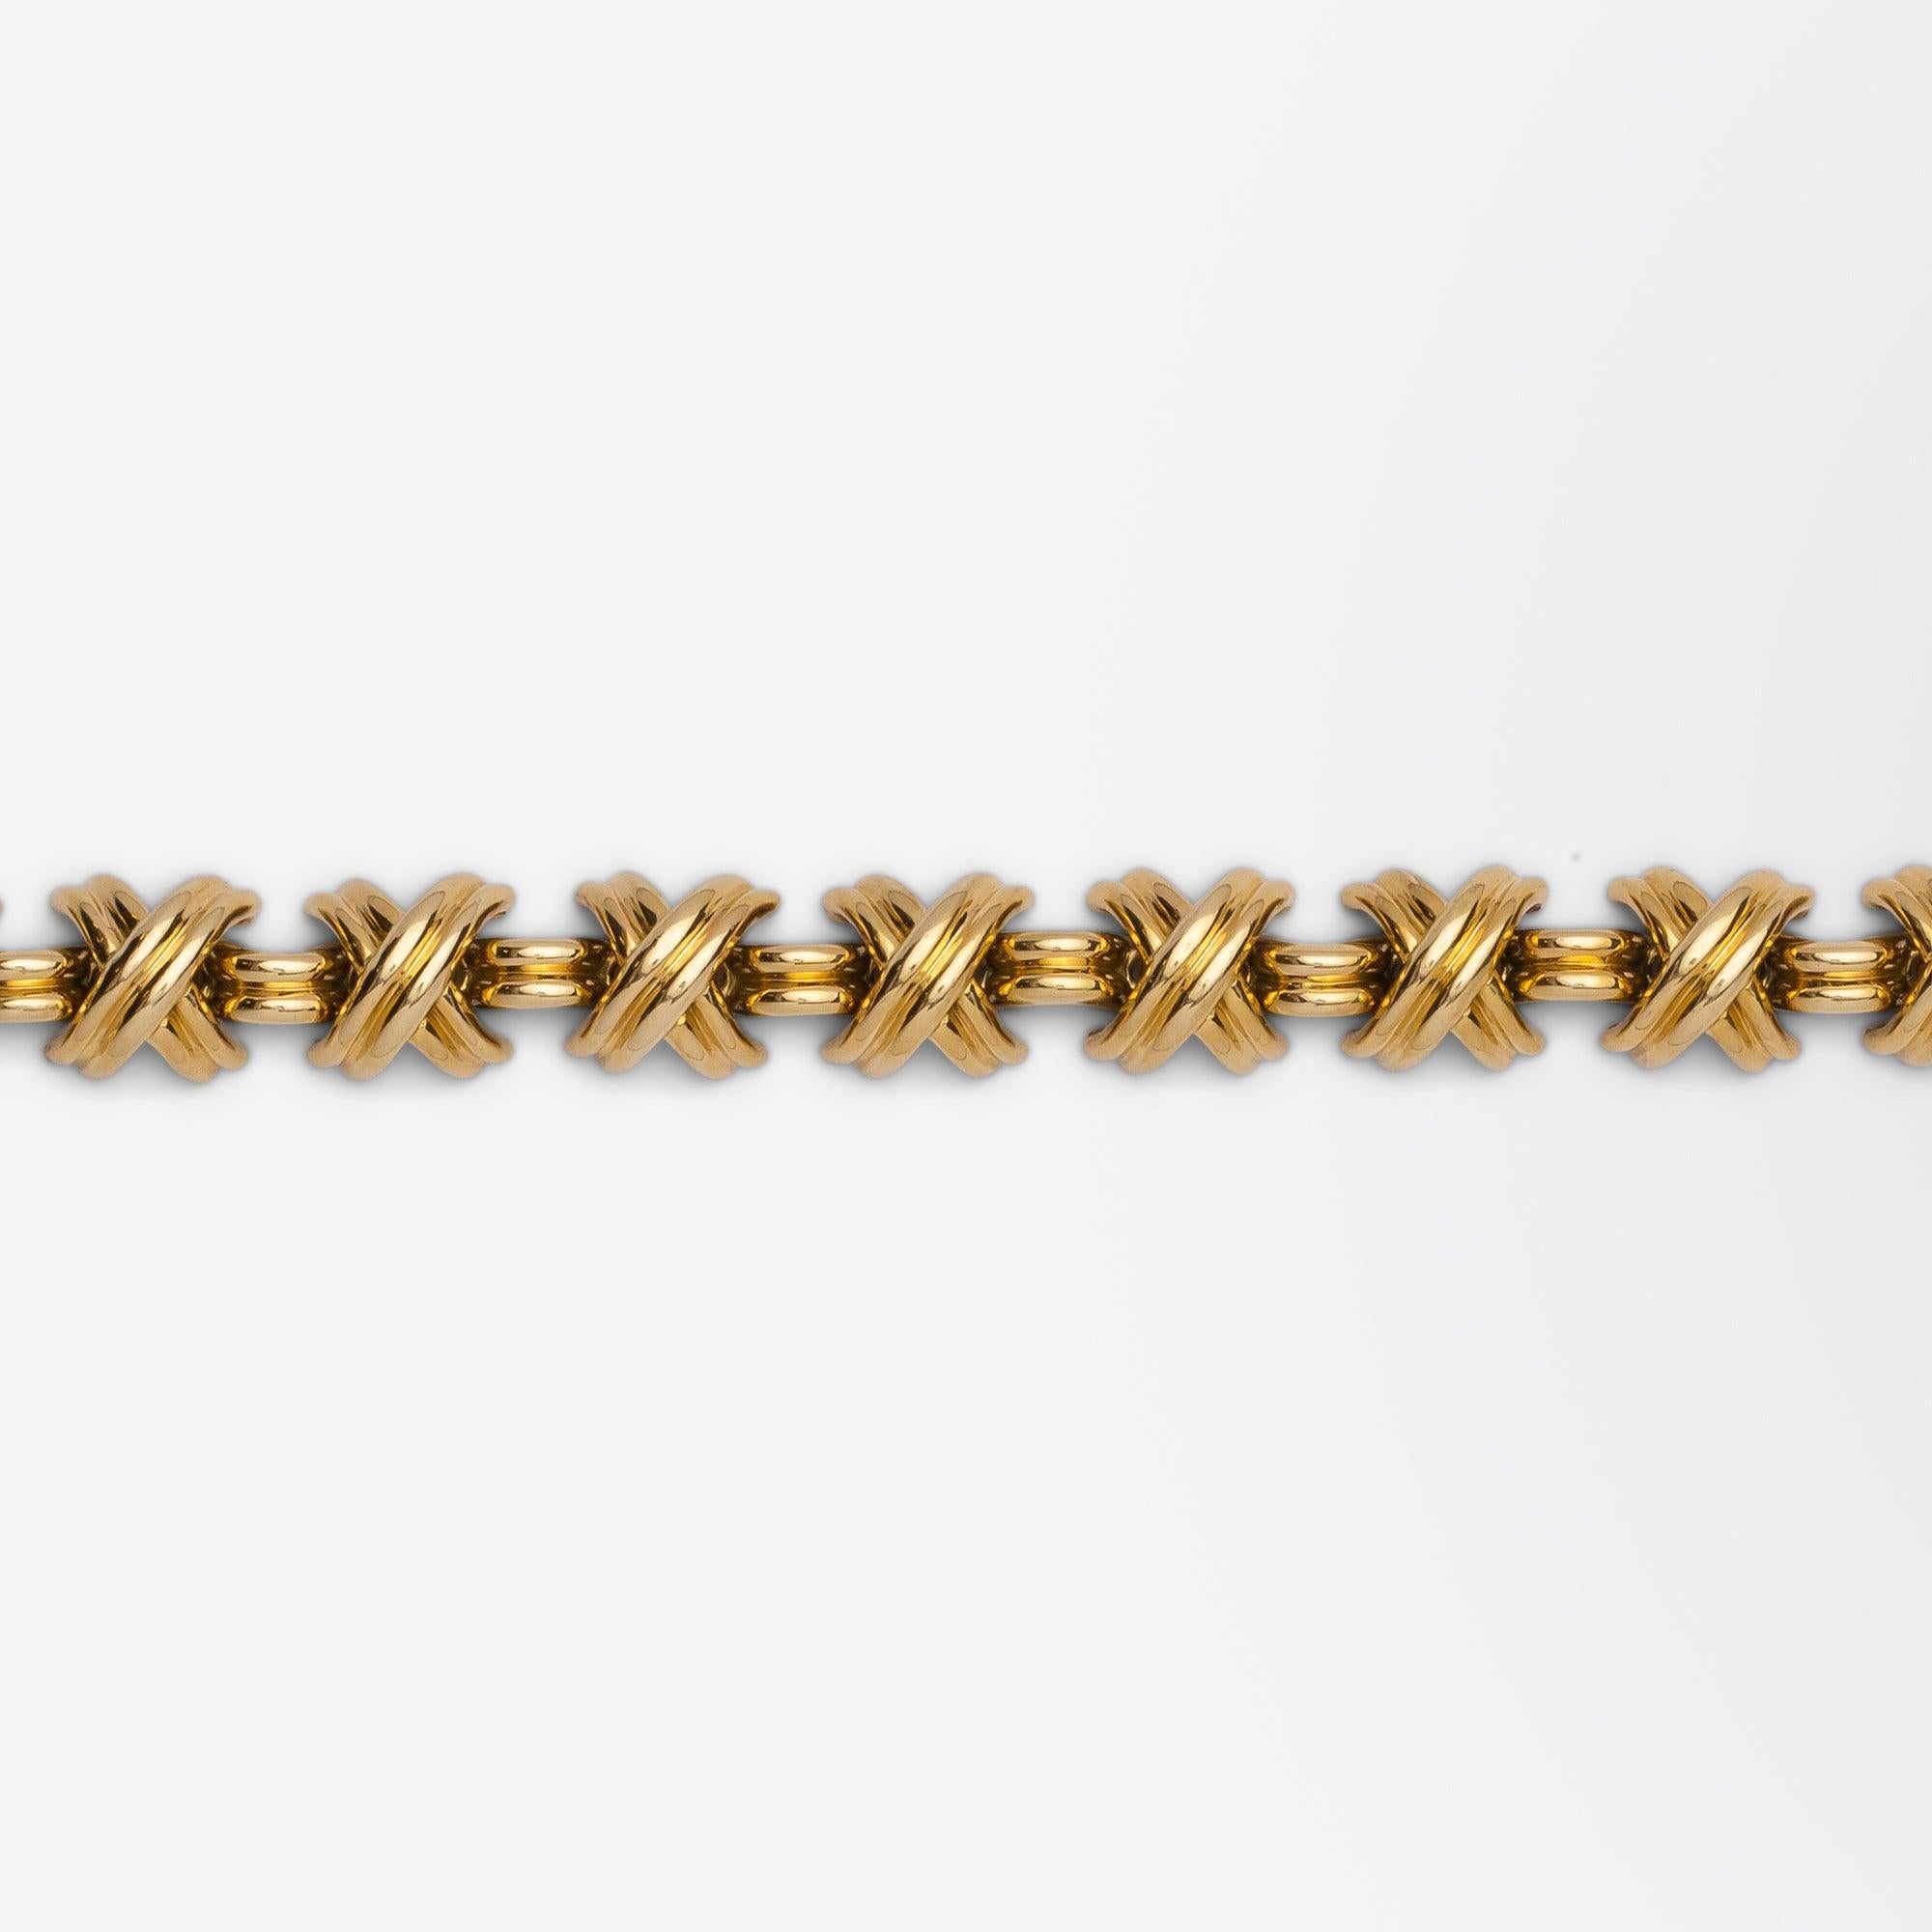 A beautifully heavy and iconic piece of armwear by Tiffany & Company known as the 'Signature X' bracelet. The solid 18 karat gold bracelet consists of groved domed 'X' shaped links with a curved small bar link between each. The hefty bracelet is